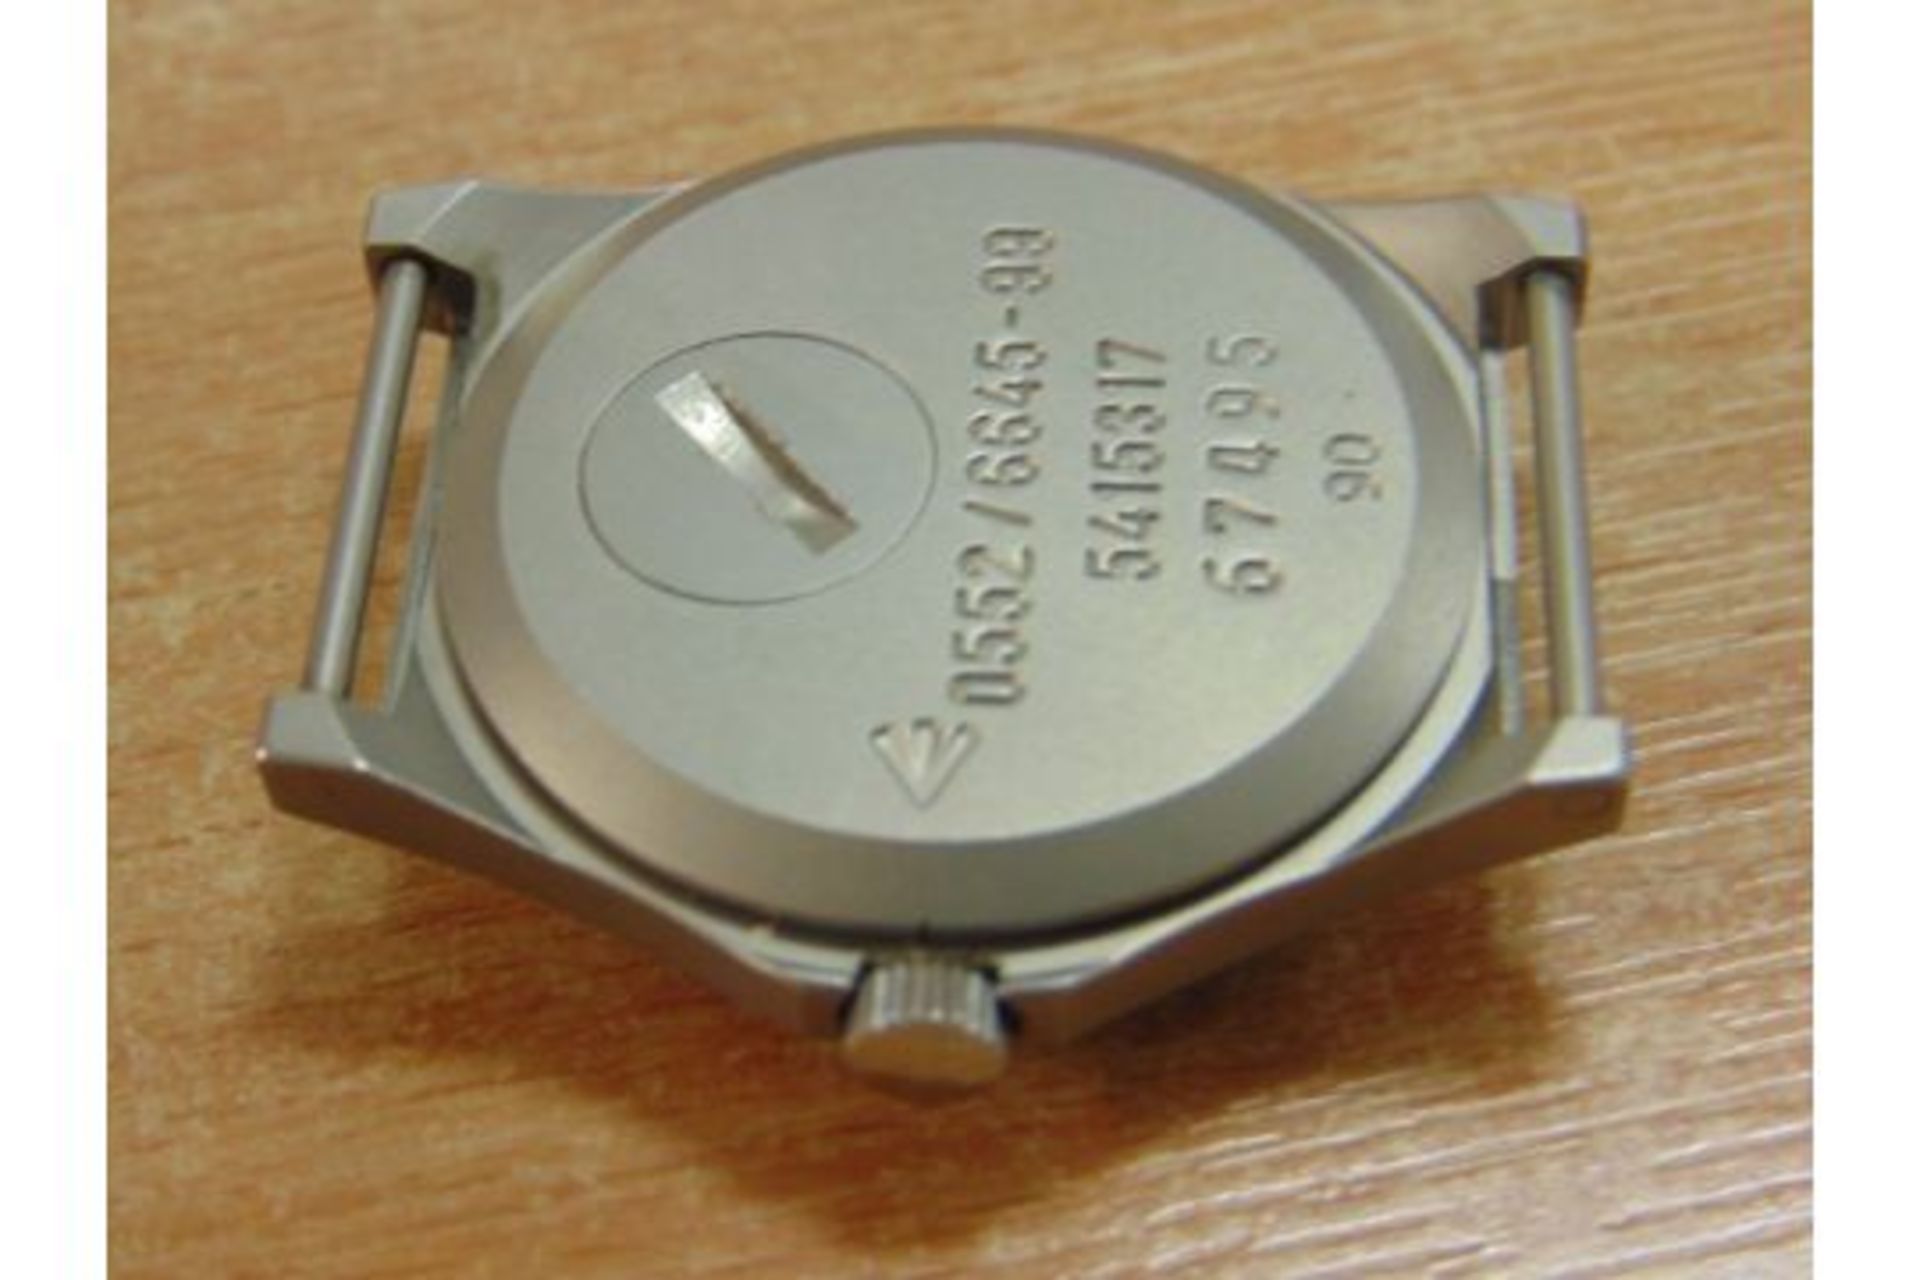 ULTRA RARE CWC 0552 ROYAL NAVY/MARINES ISSUE SERVICE WATCH DATED 1990 GULF WAR - UNISSUED - Image 5 of 8